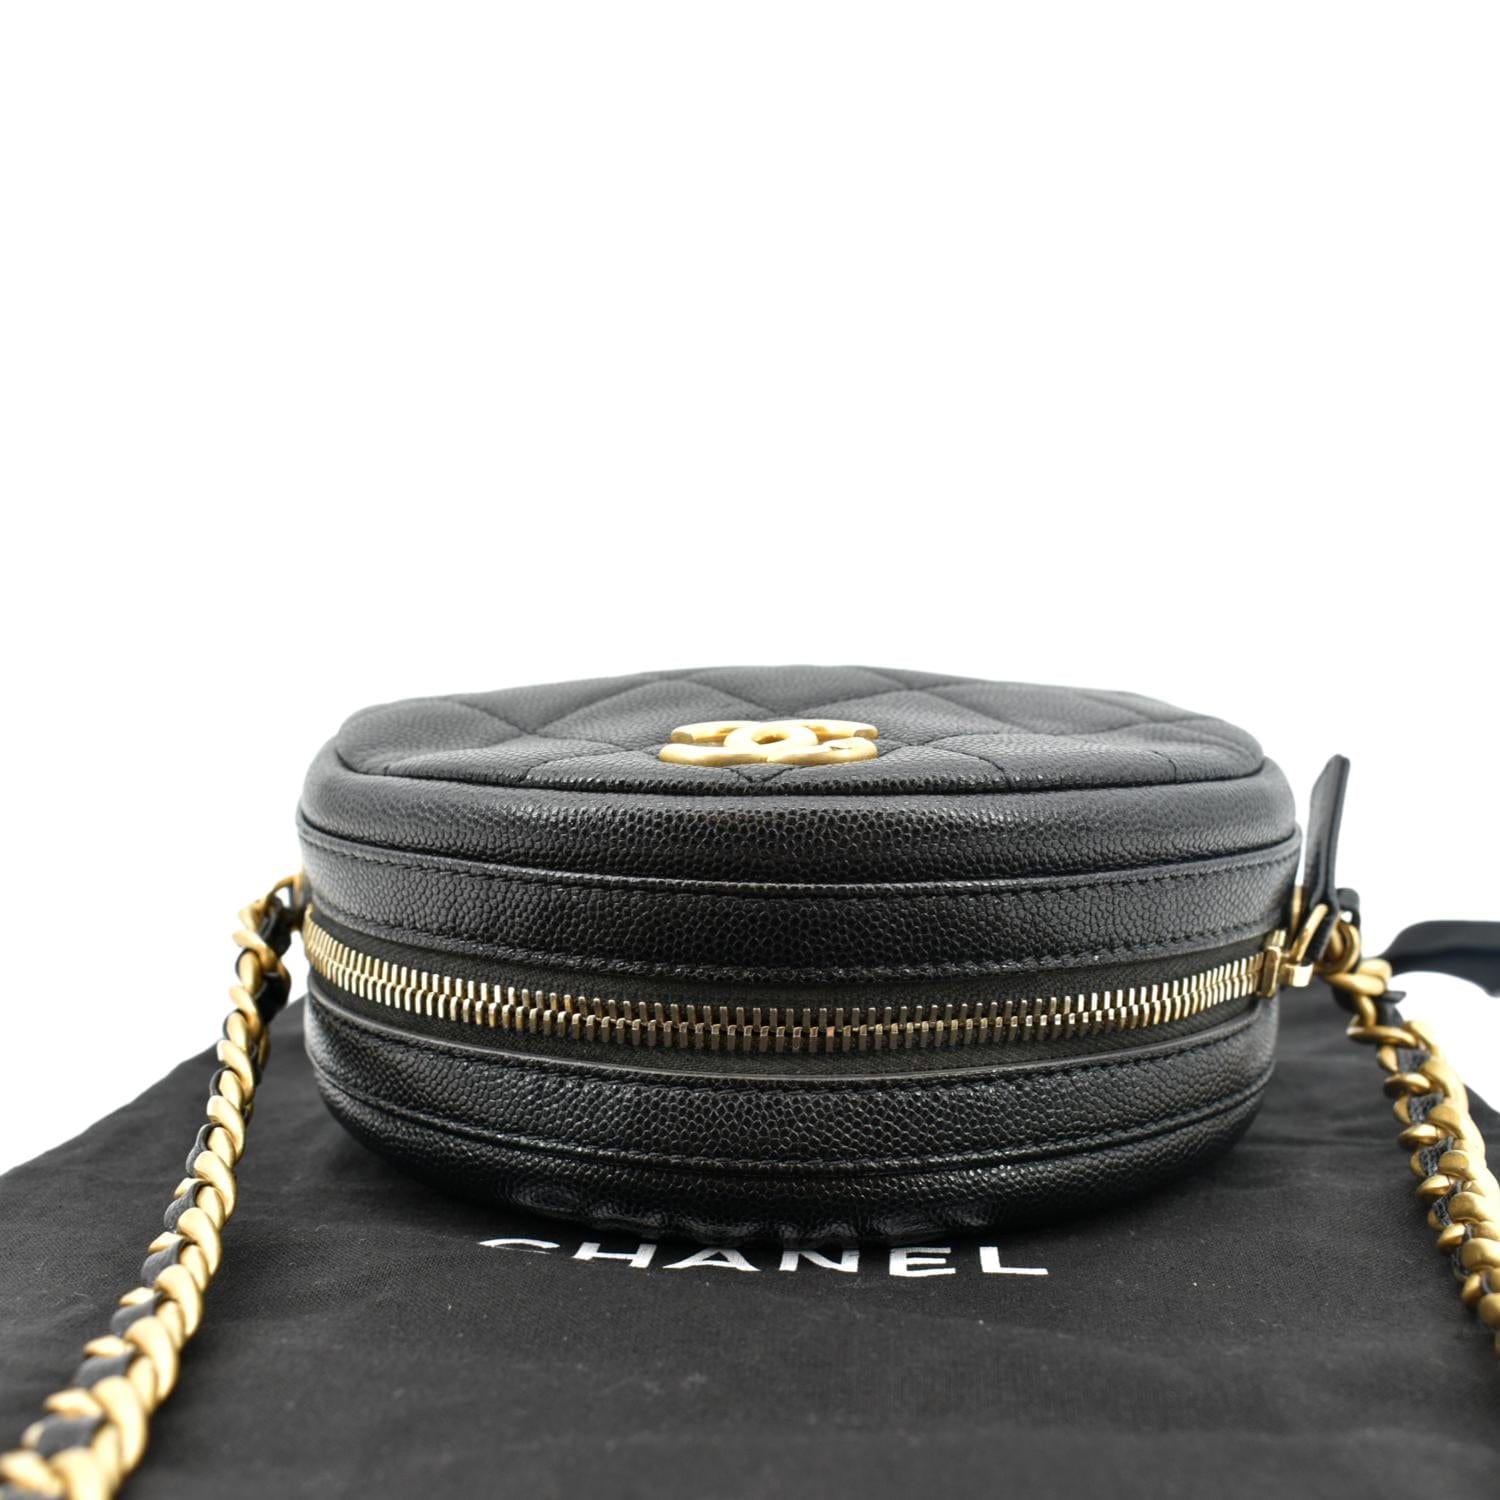 Chanel 2020 Round Vanity Clutch With Chain - Black Crossbody Bags